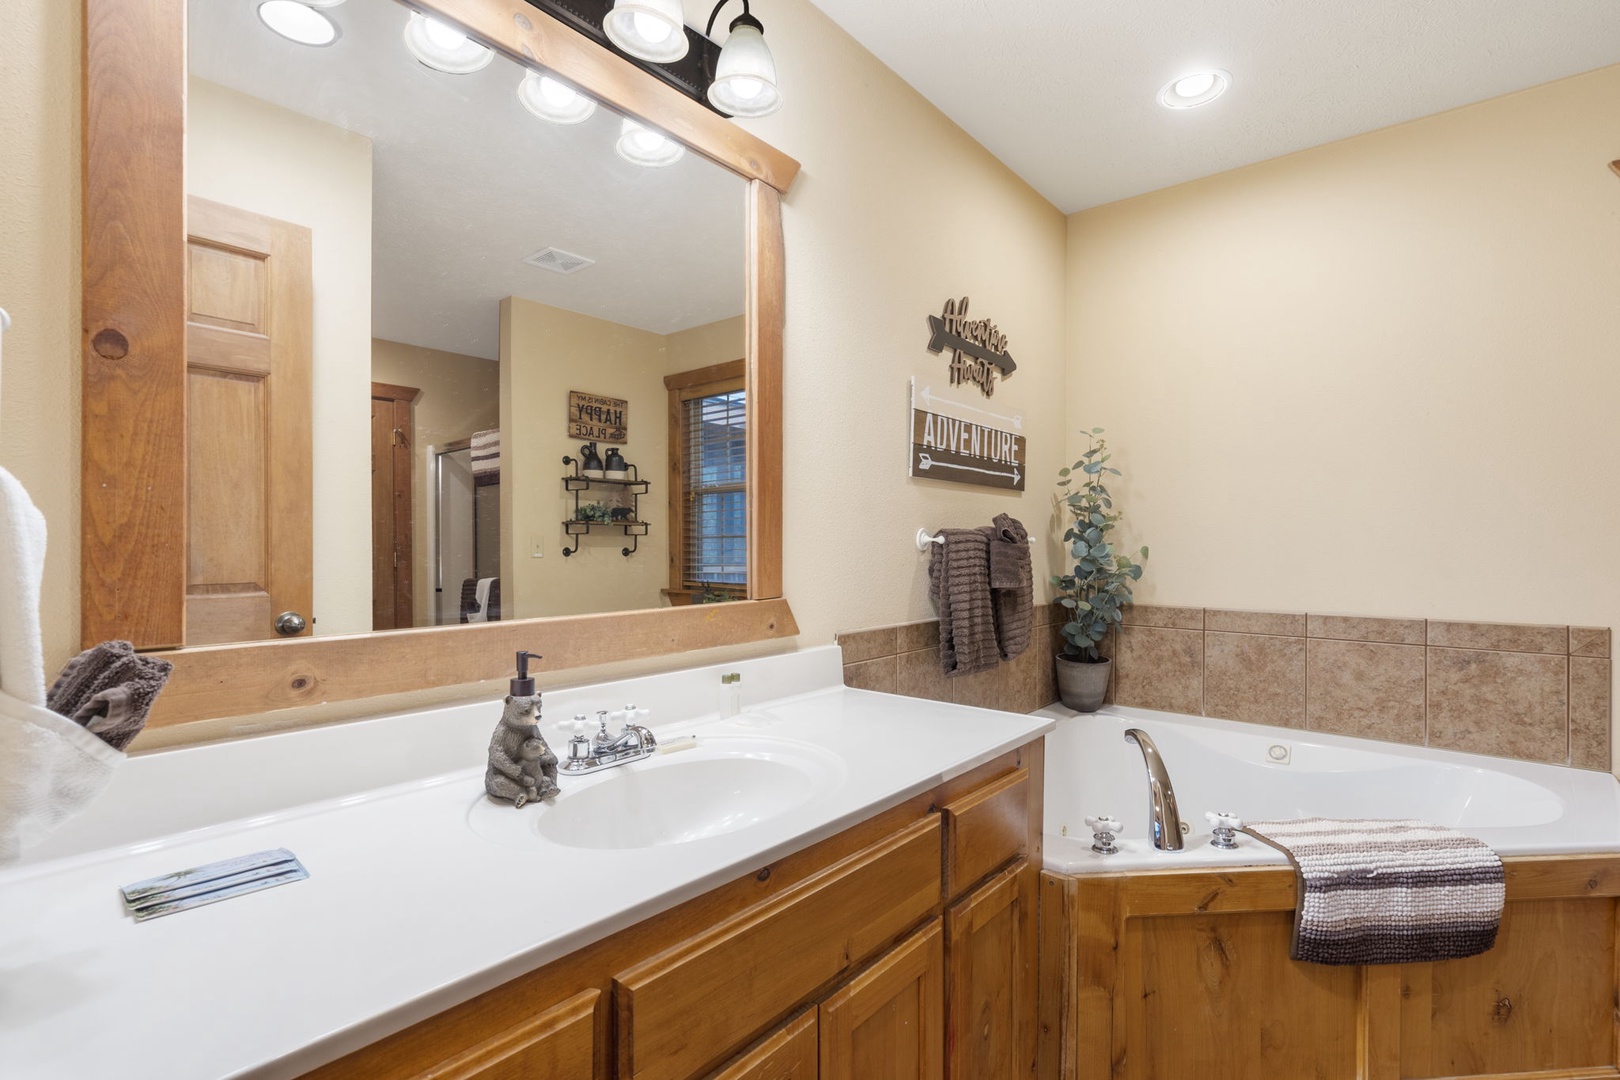 This king ensuite boasts a spacious vanity, glass shower, & luxurious jetted tub